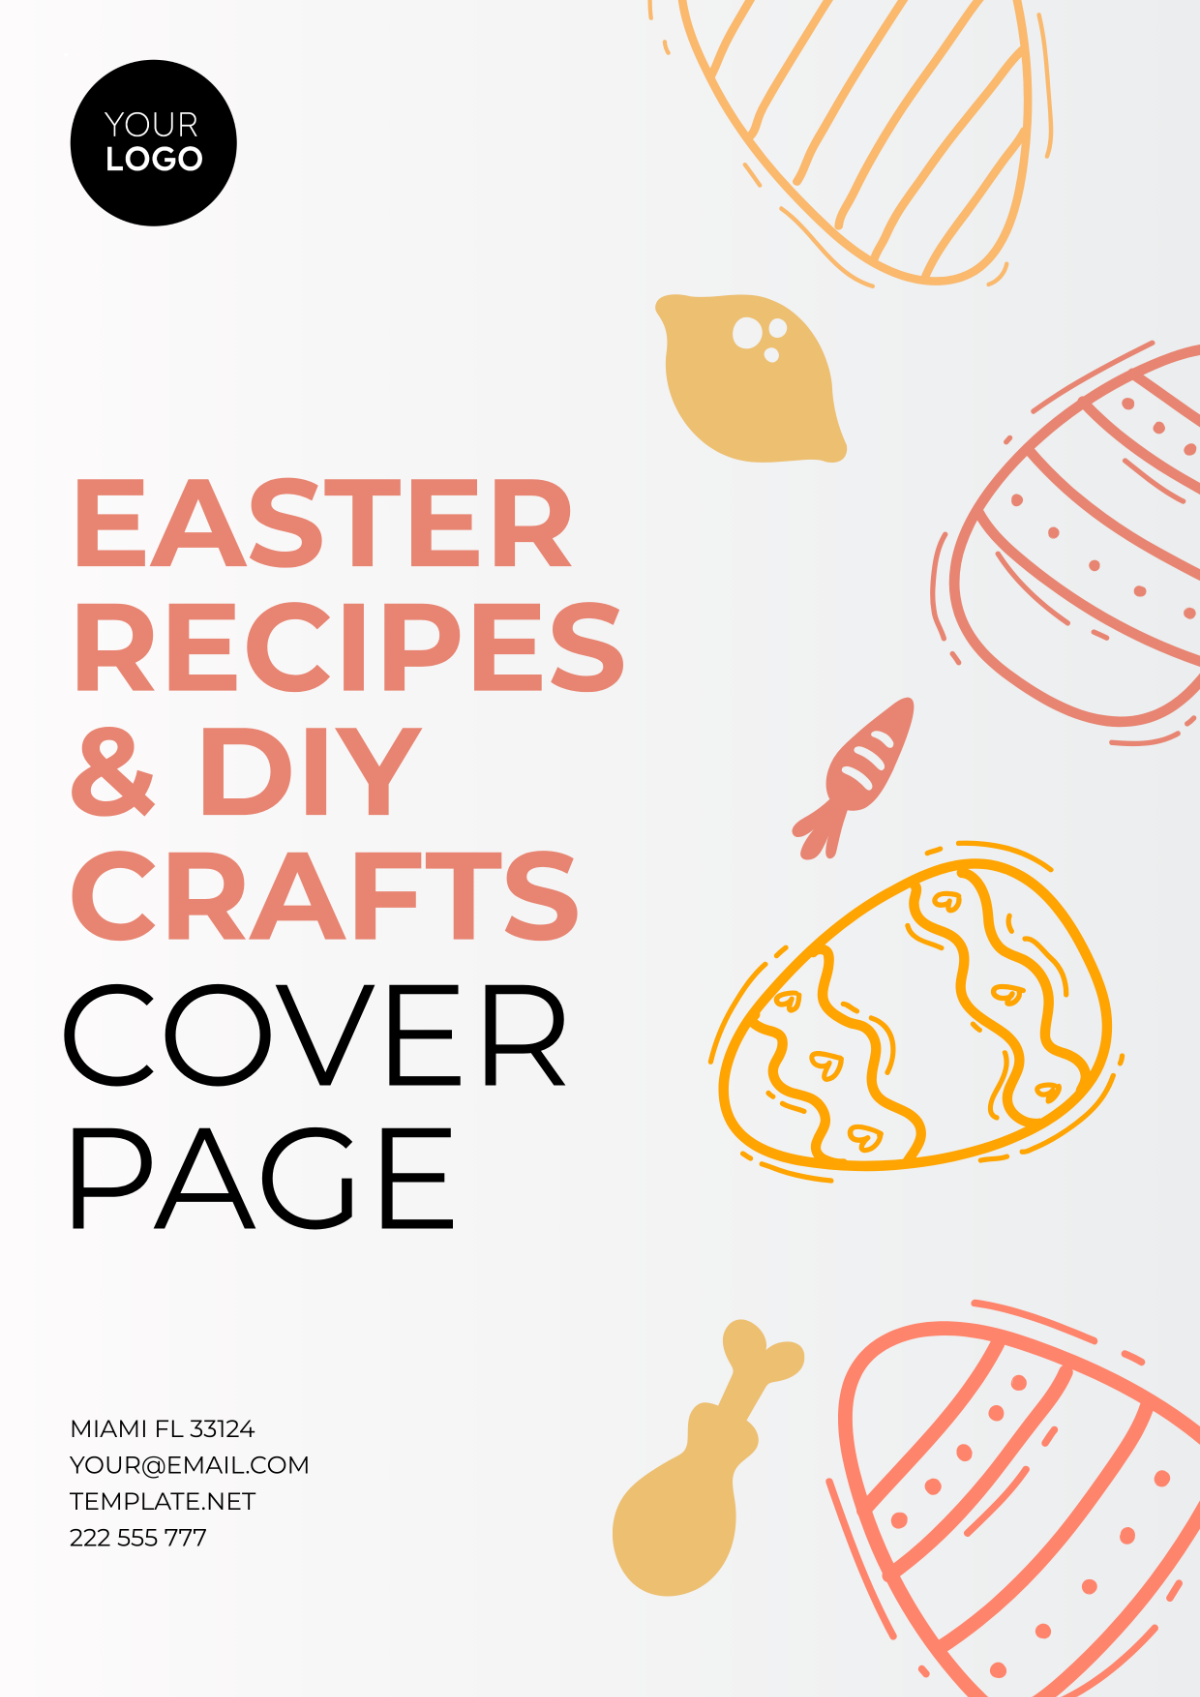 Easter Recipes & DIY Crafts Cover Page